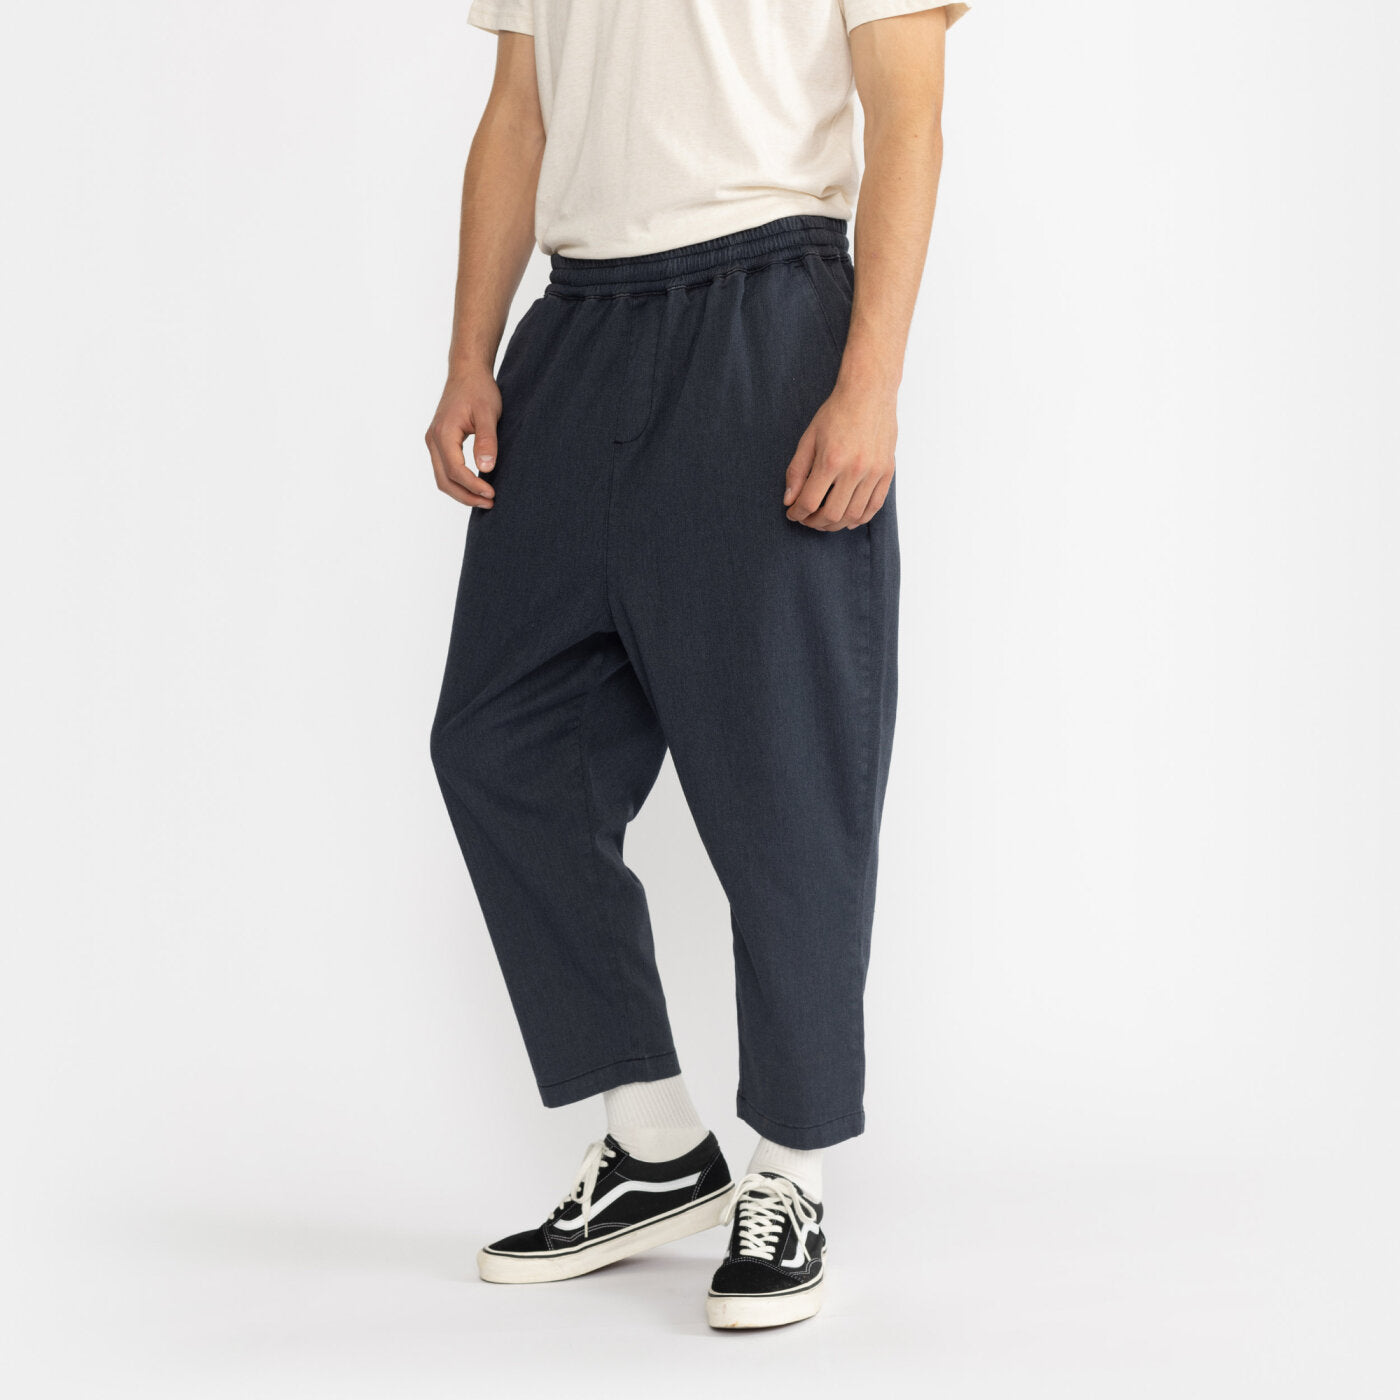 Baggy casual trousers